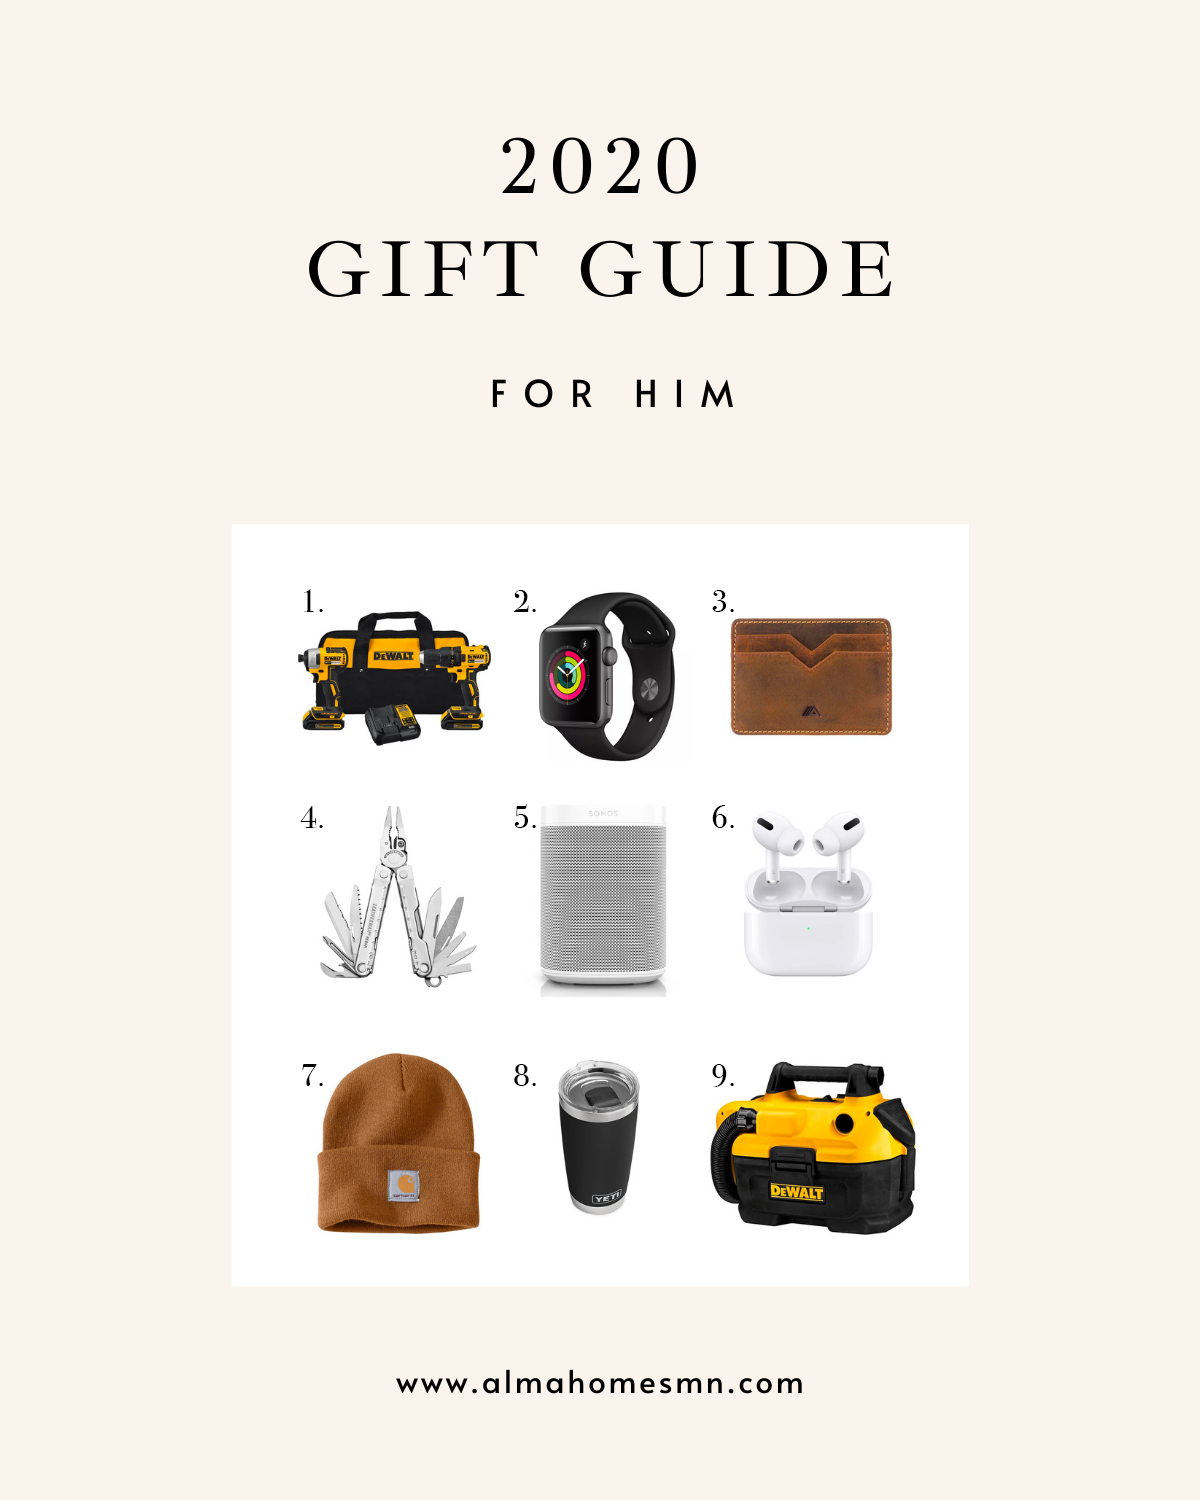 Alma Homes 2020 Gift Guide for Him